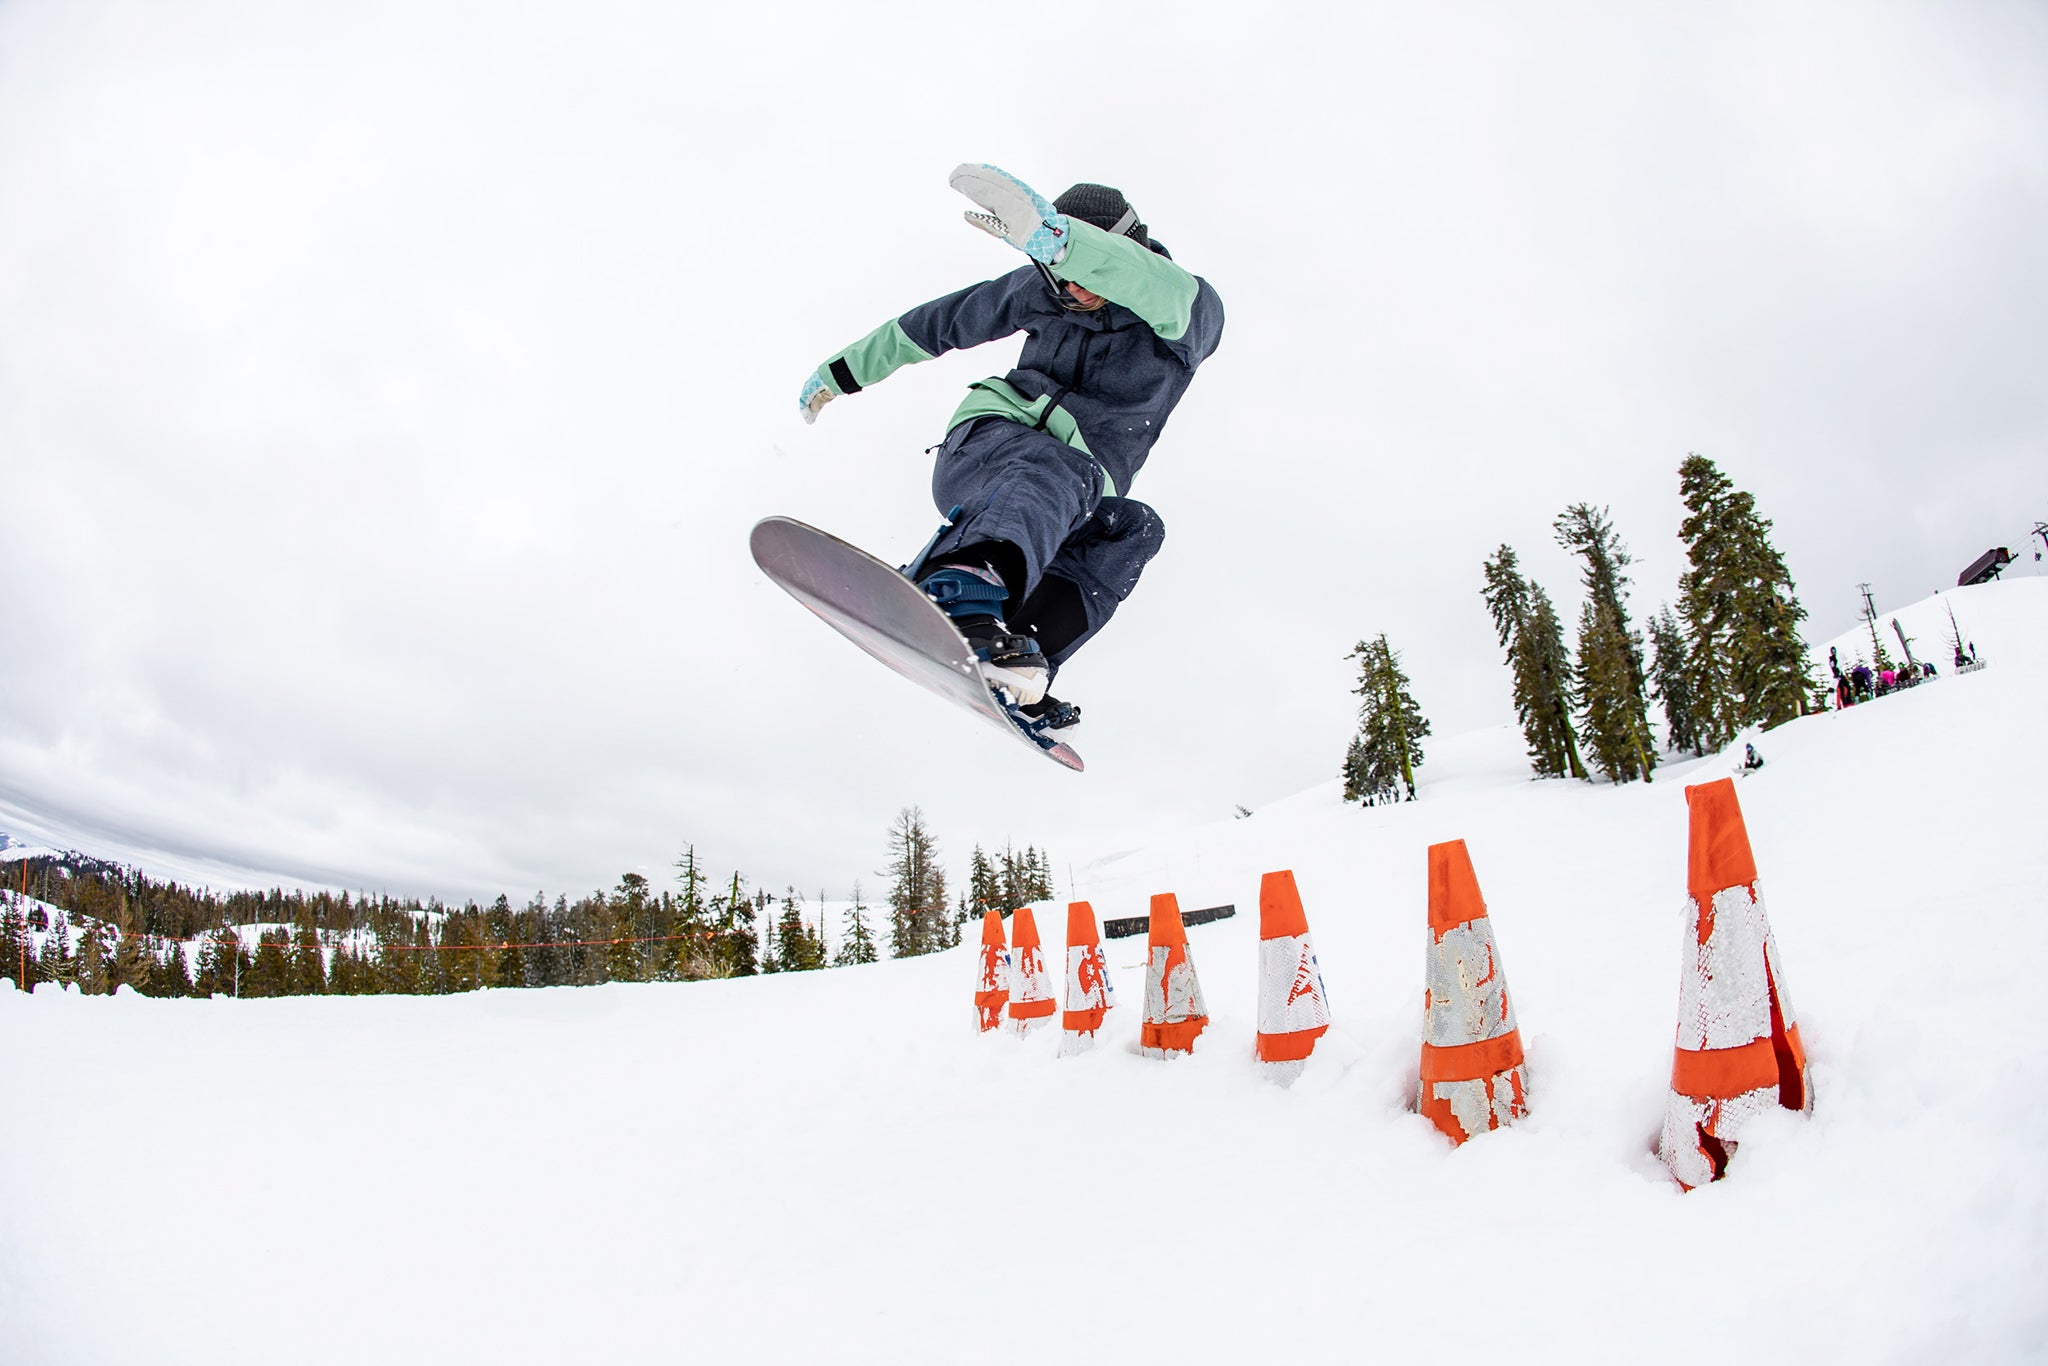 Snowboarder jumping over cones in snow